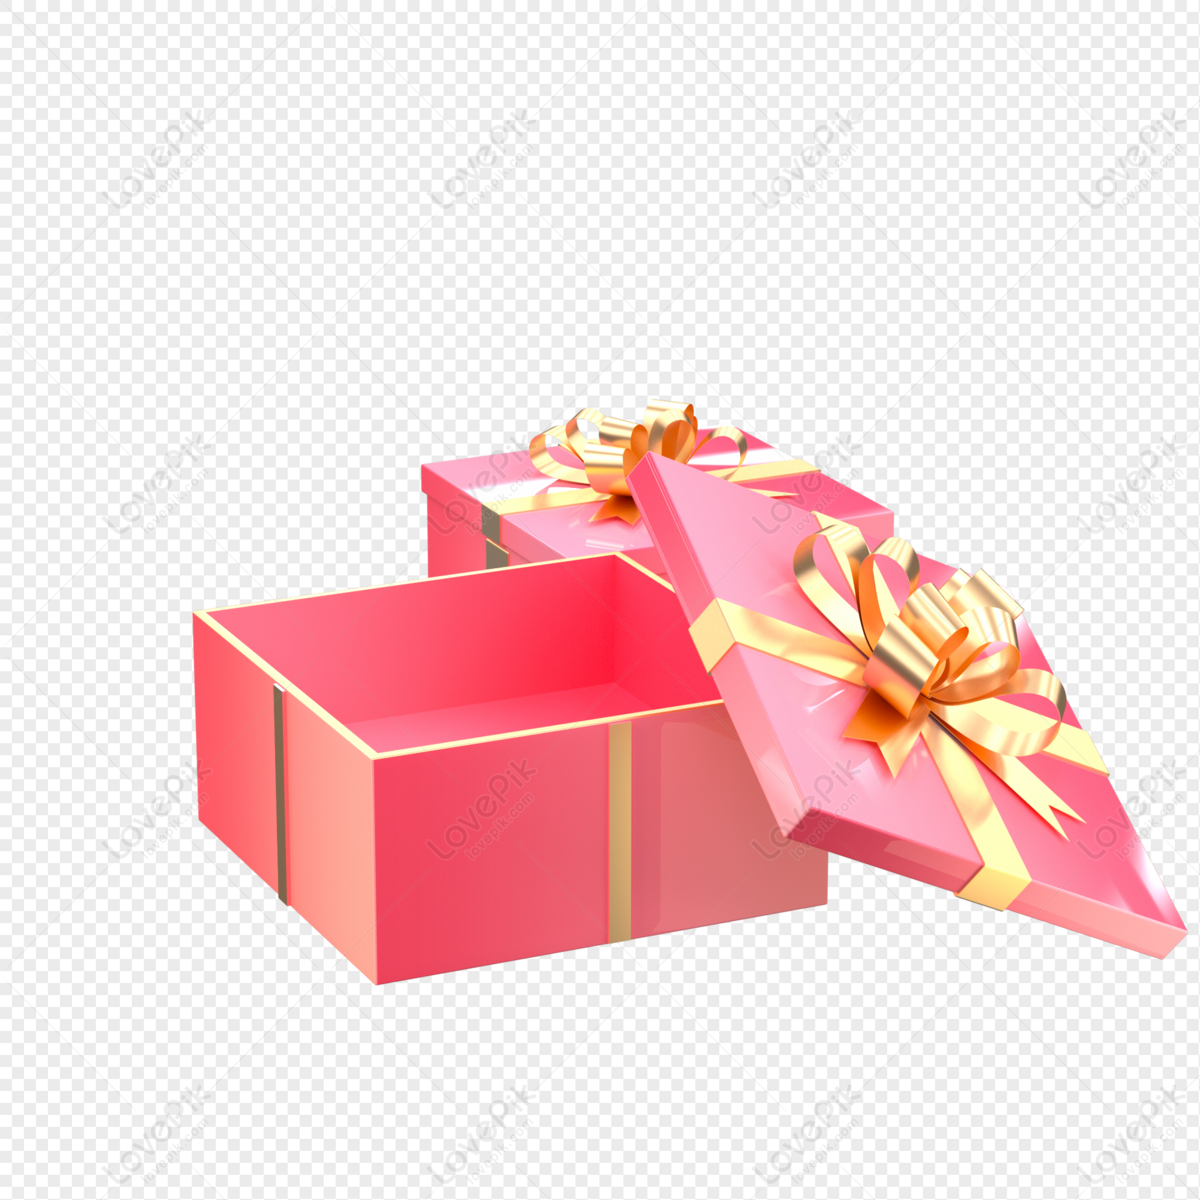 Open The Gift Box PNG Transparent Images Free Download